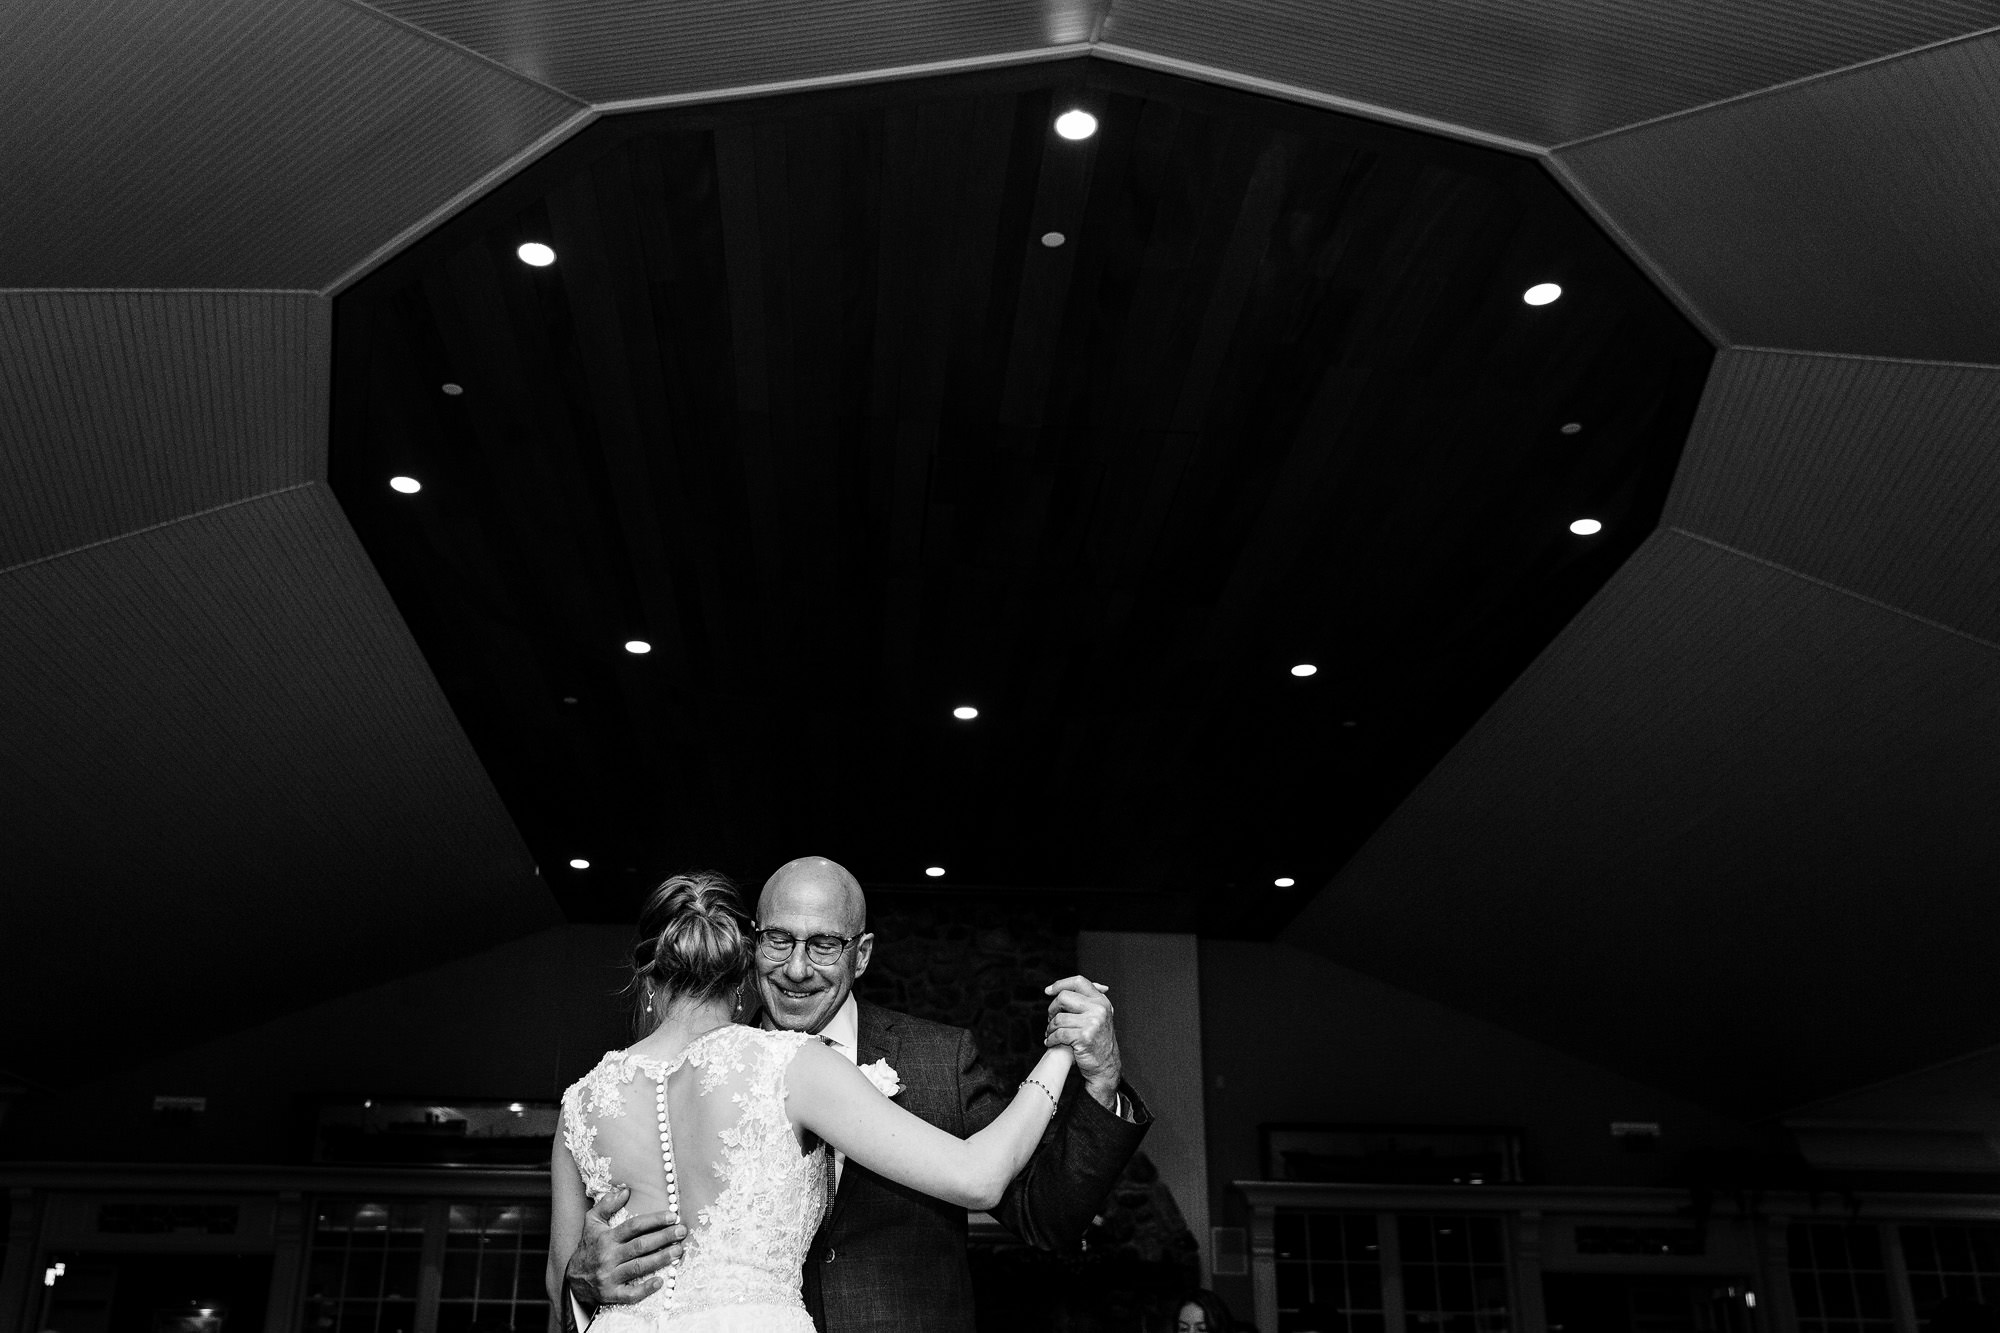 The bride dances with her father at her wedding at Point Lookout